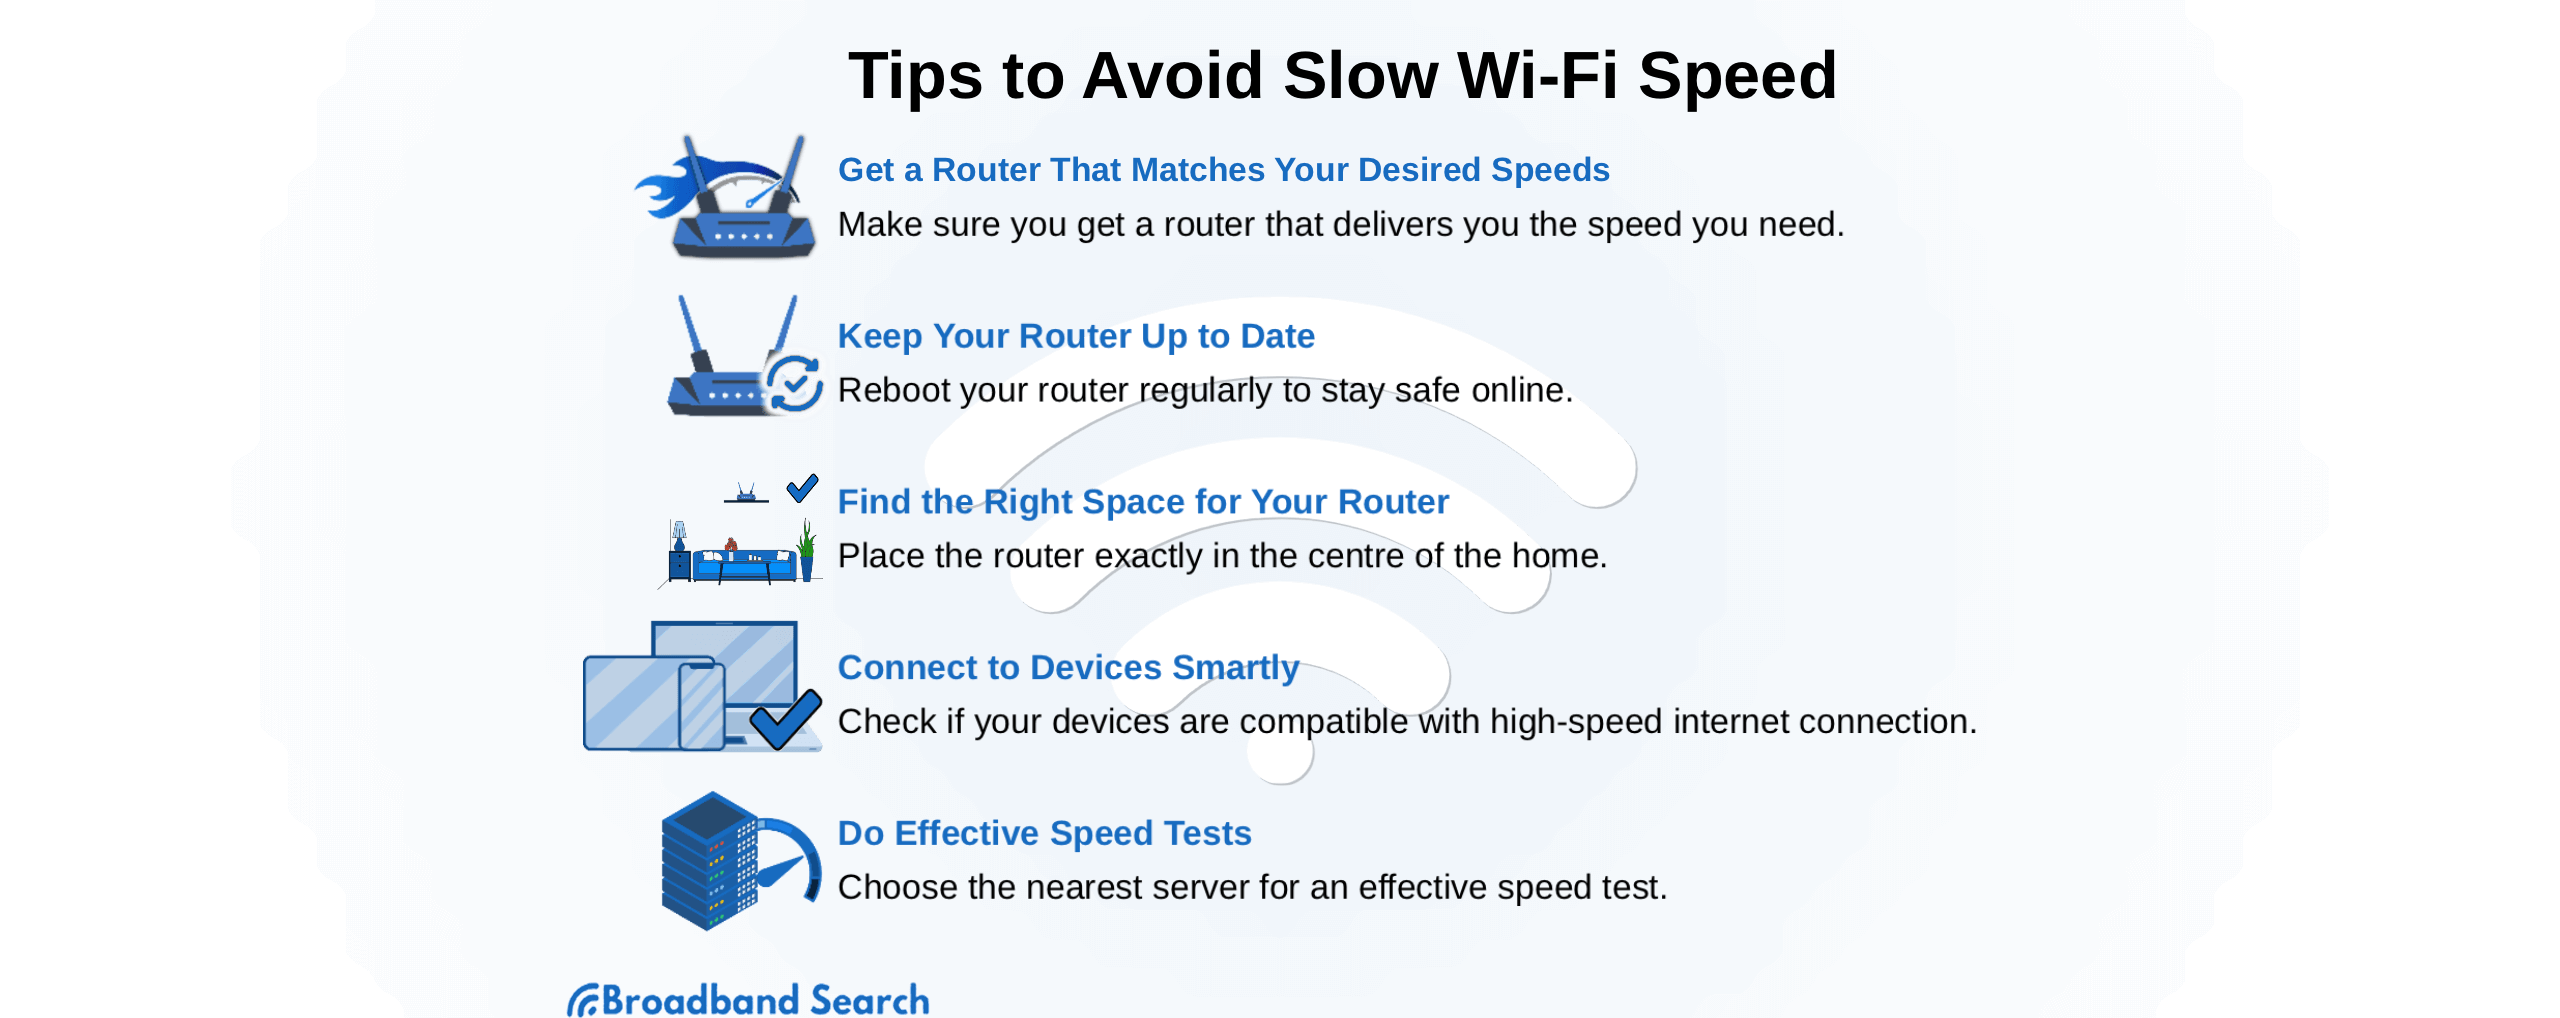 Tips to avoid slow Wi-Fi speed